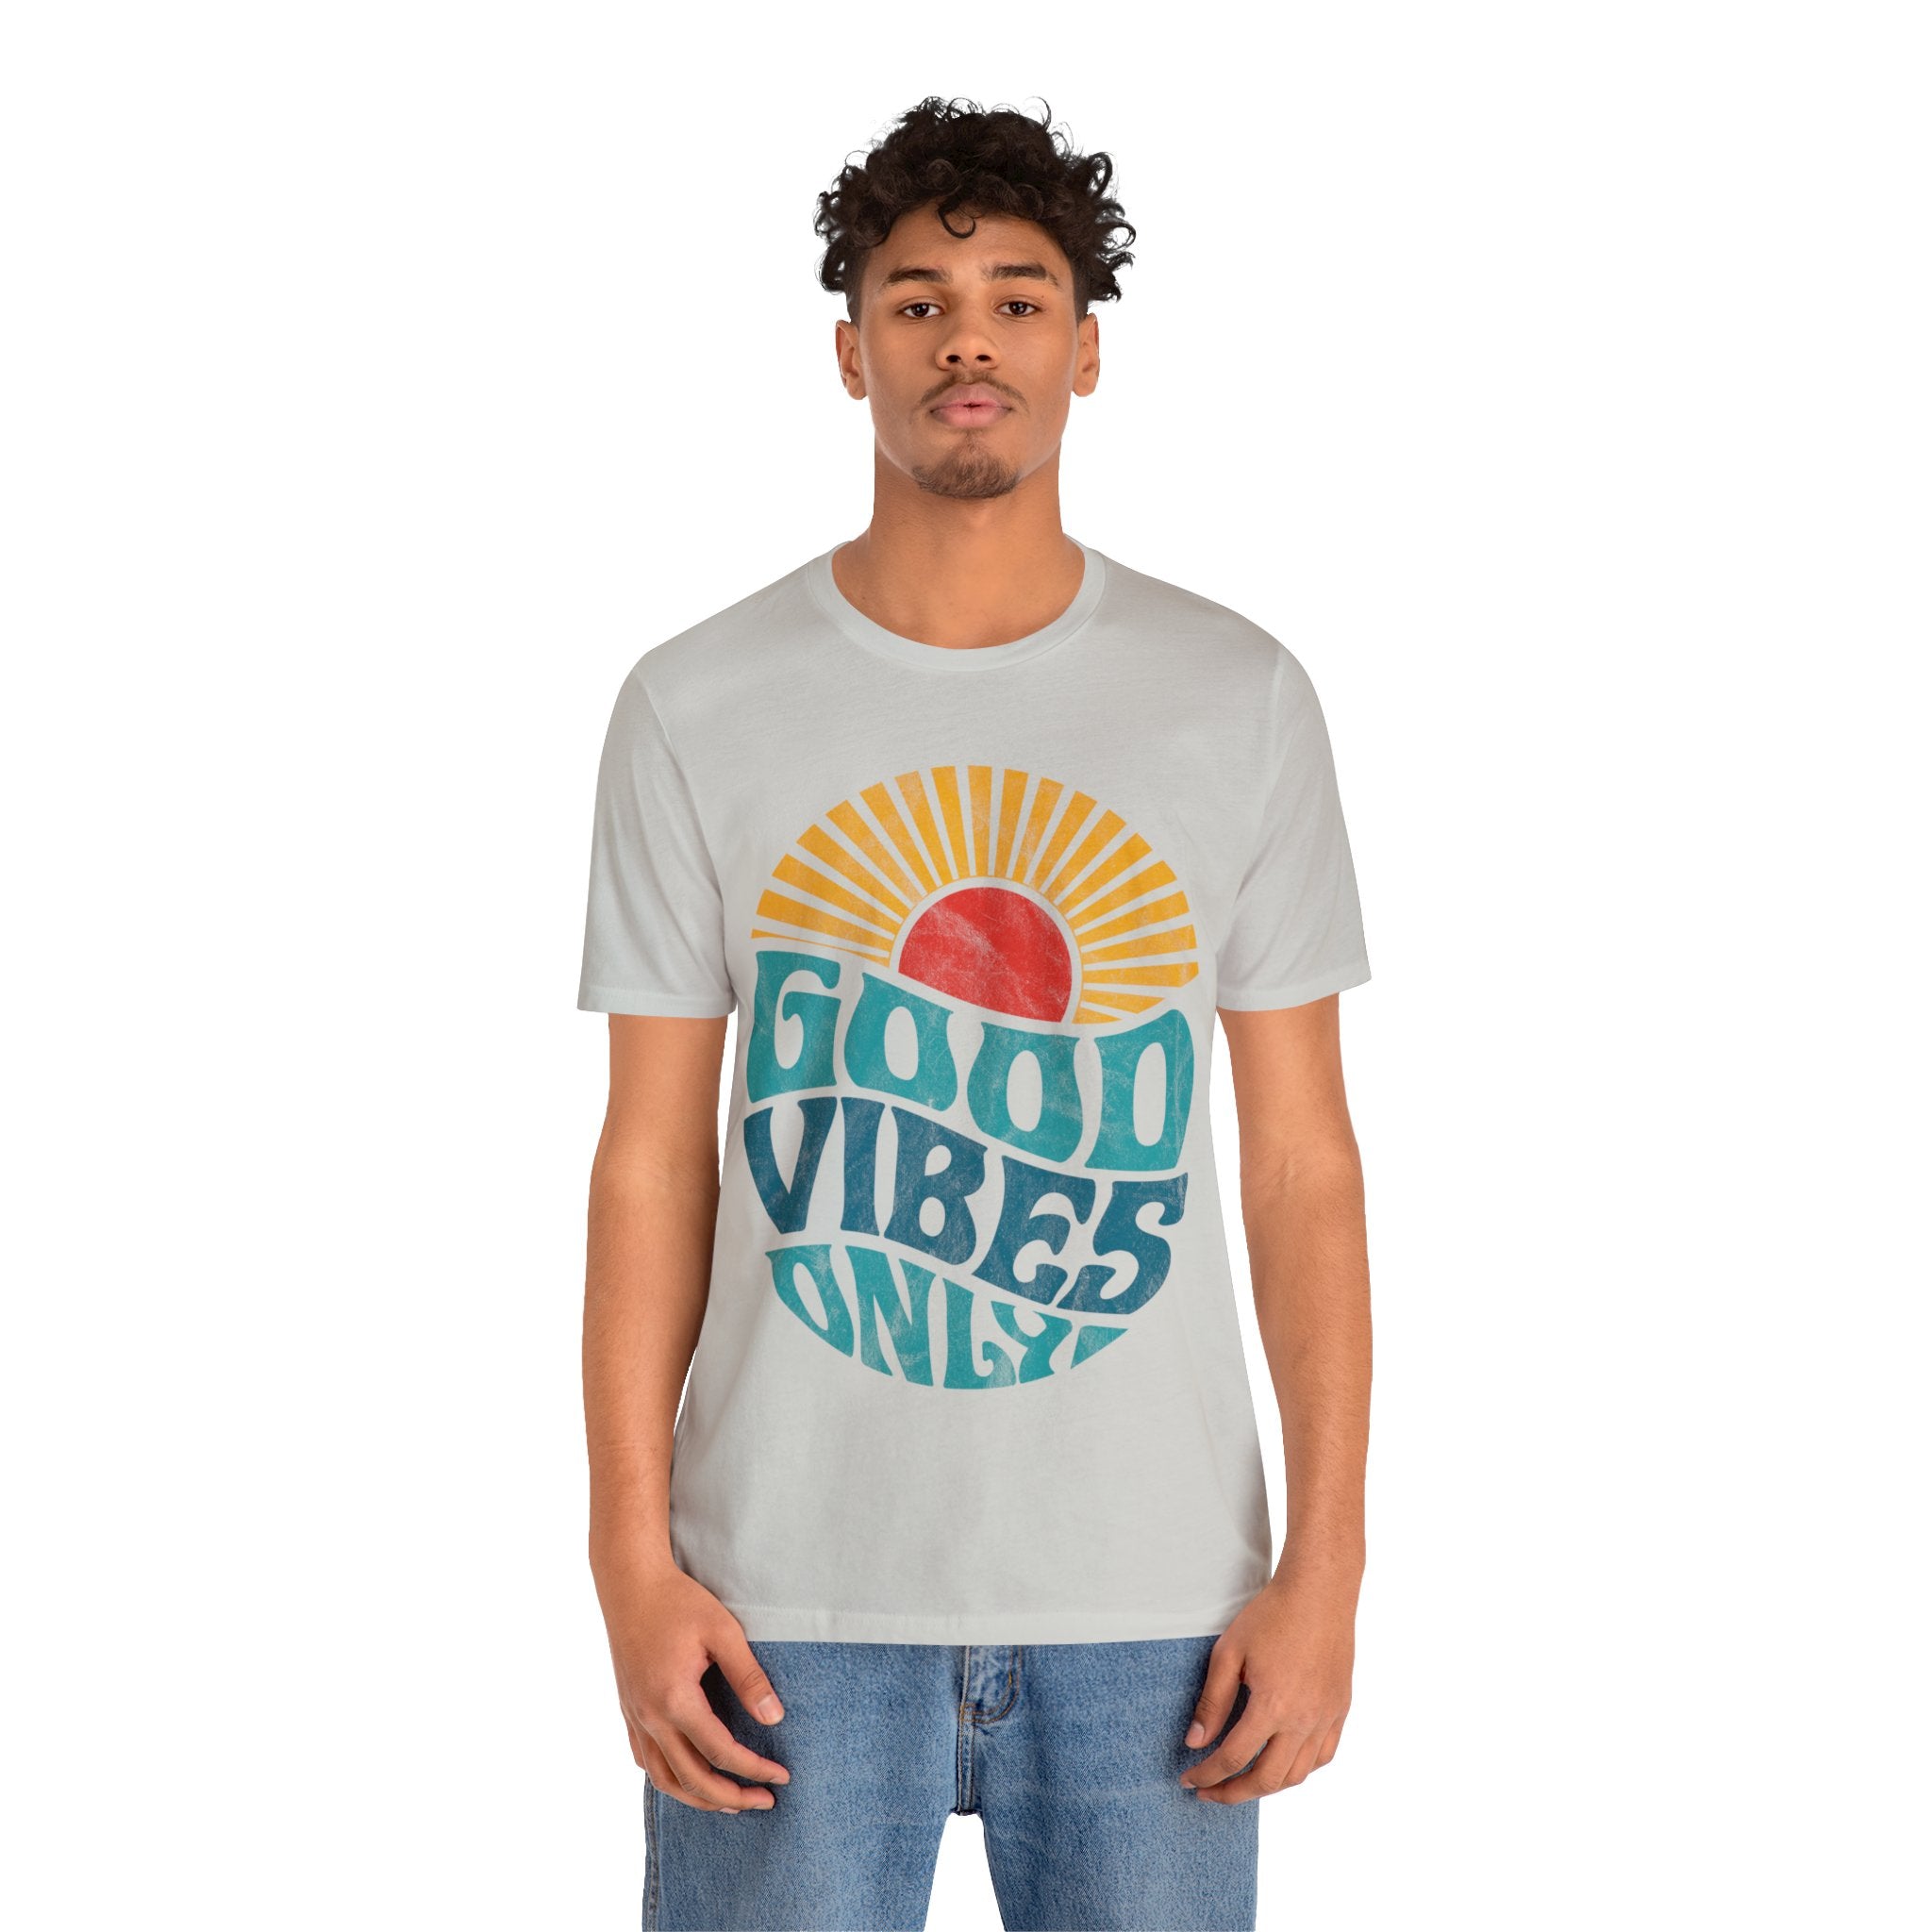 Good Vibes Only Hippie